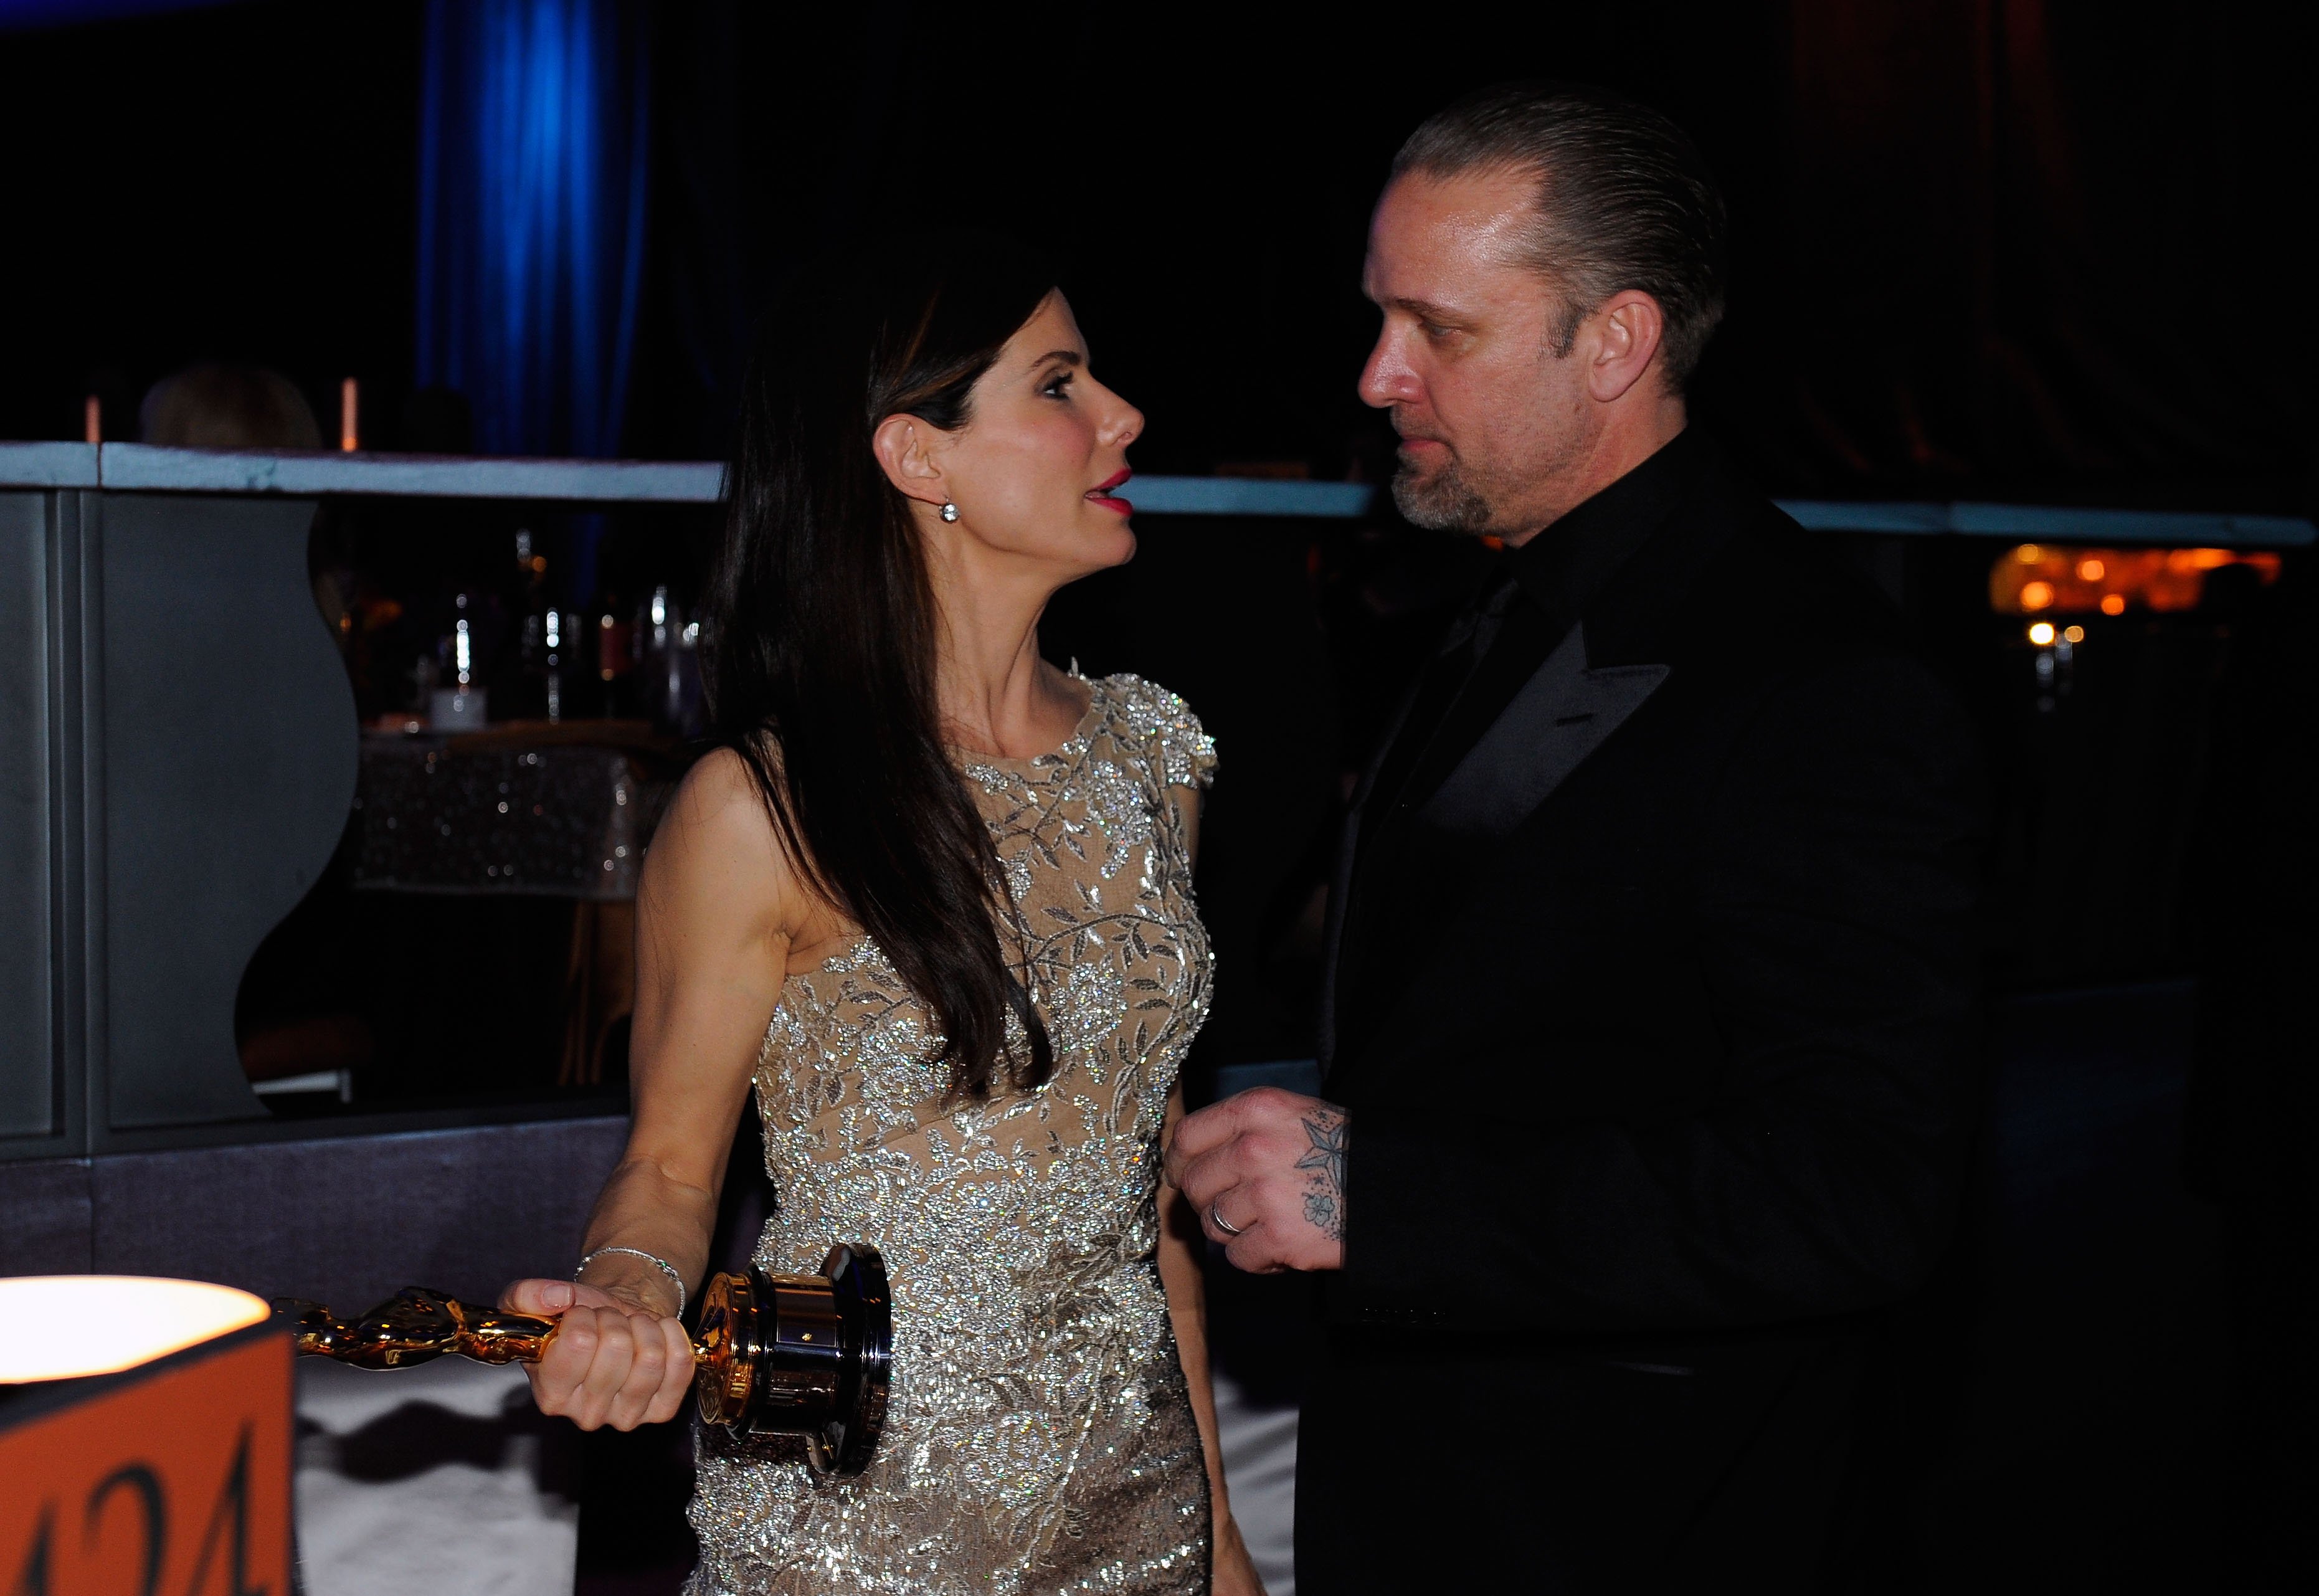  Actress Sandra Bullock, winner of the Best Actress award for 'The Blind Side,' and husband Jesse James attend the 82nd Annual Academy Awards Governor's Ball held at Kodak Theatre on March 7, 2010 in Hollywood, California. | Source: Getty Images